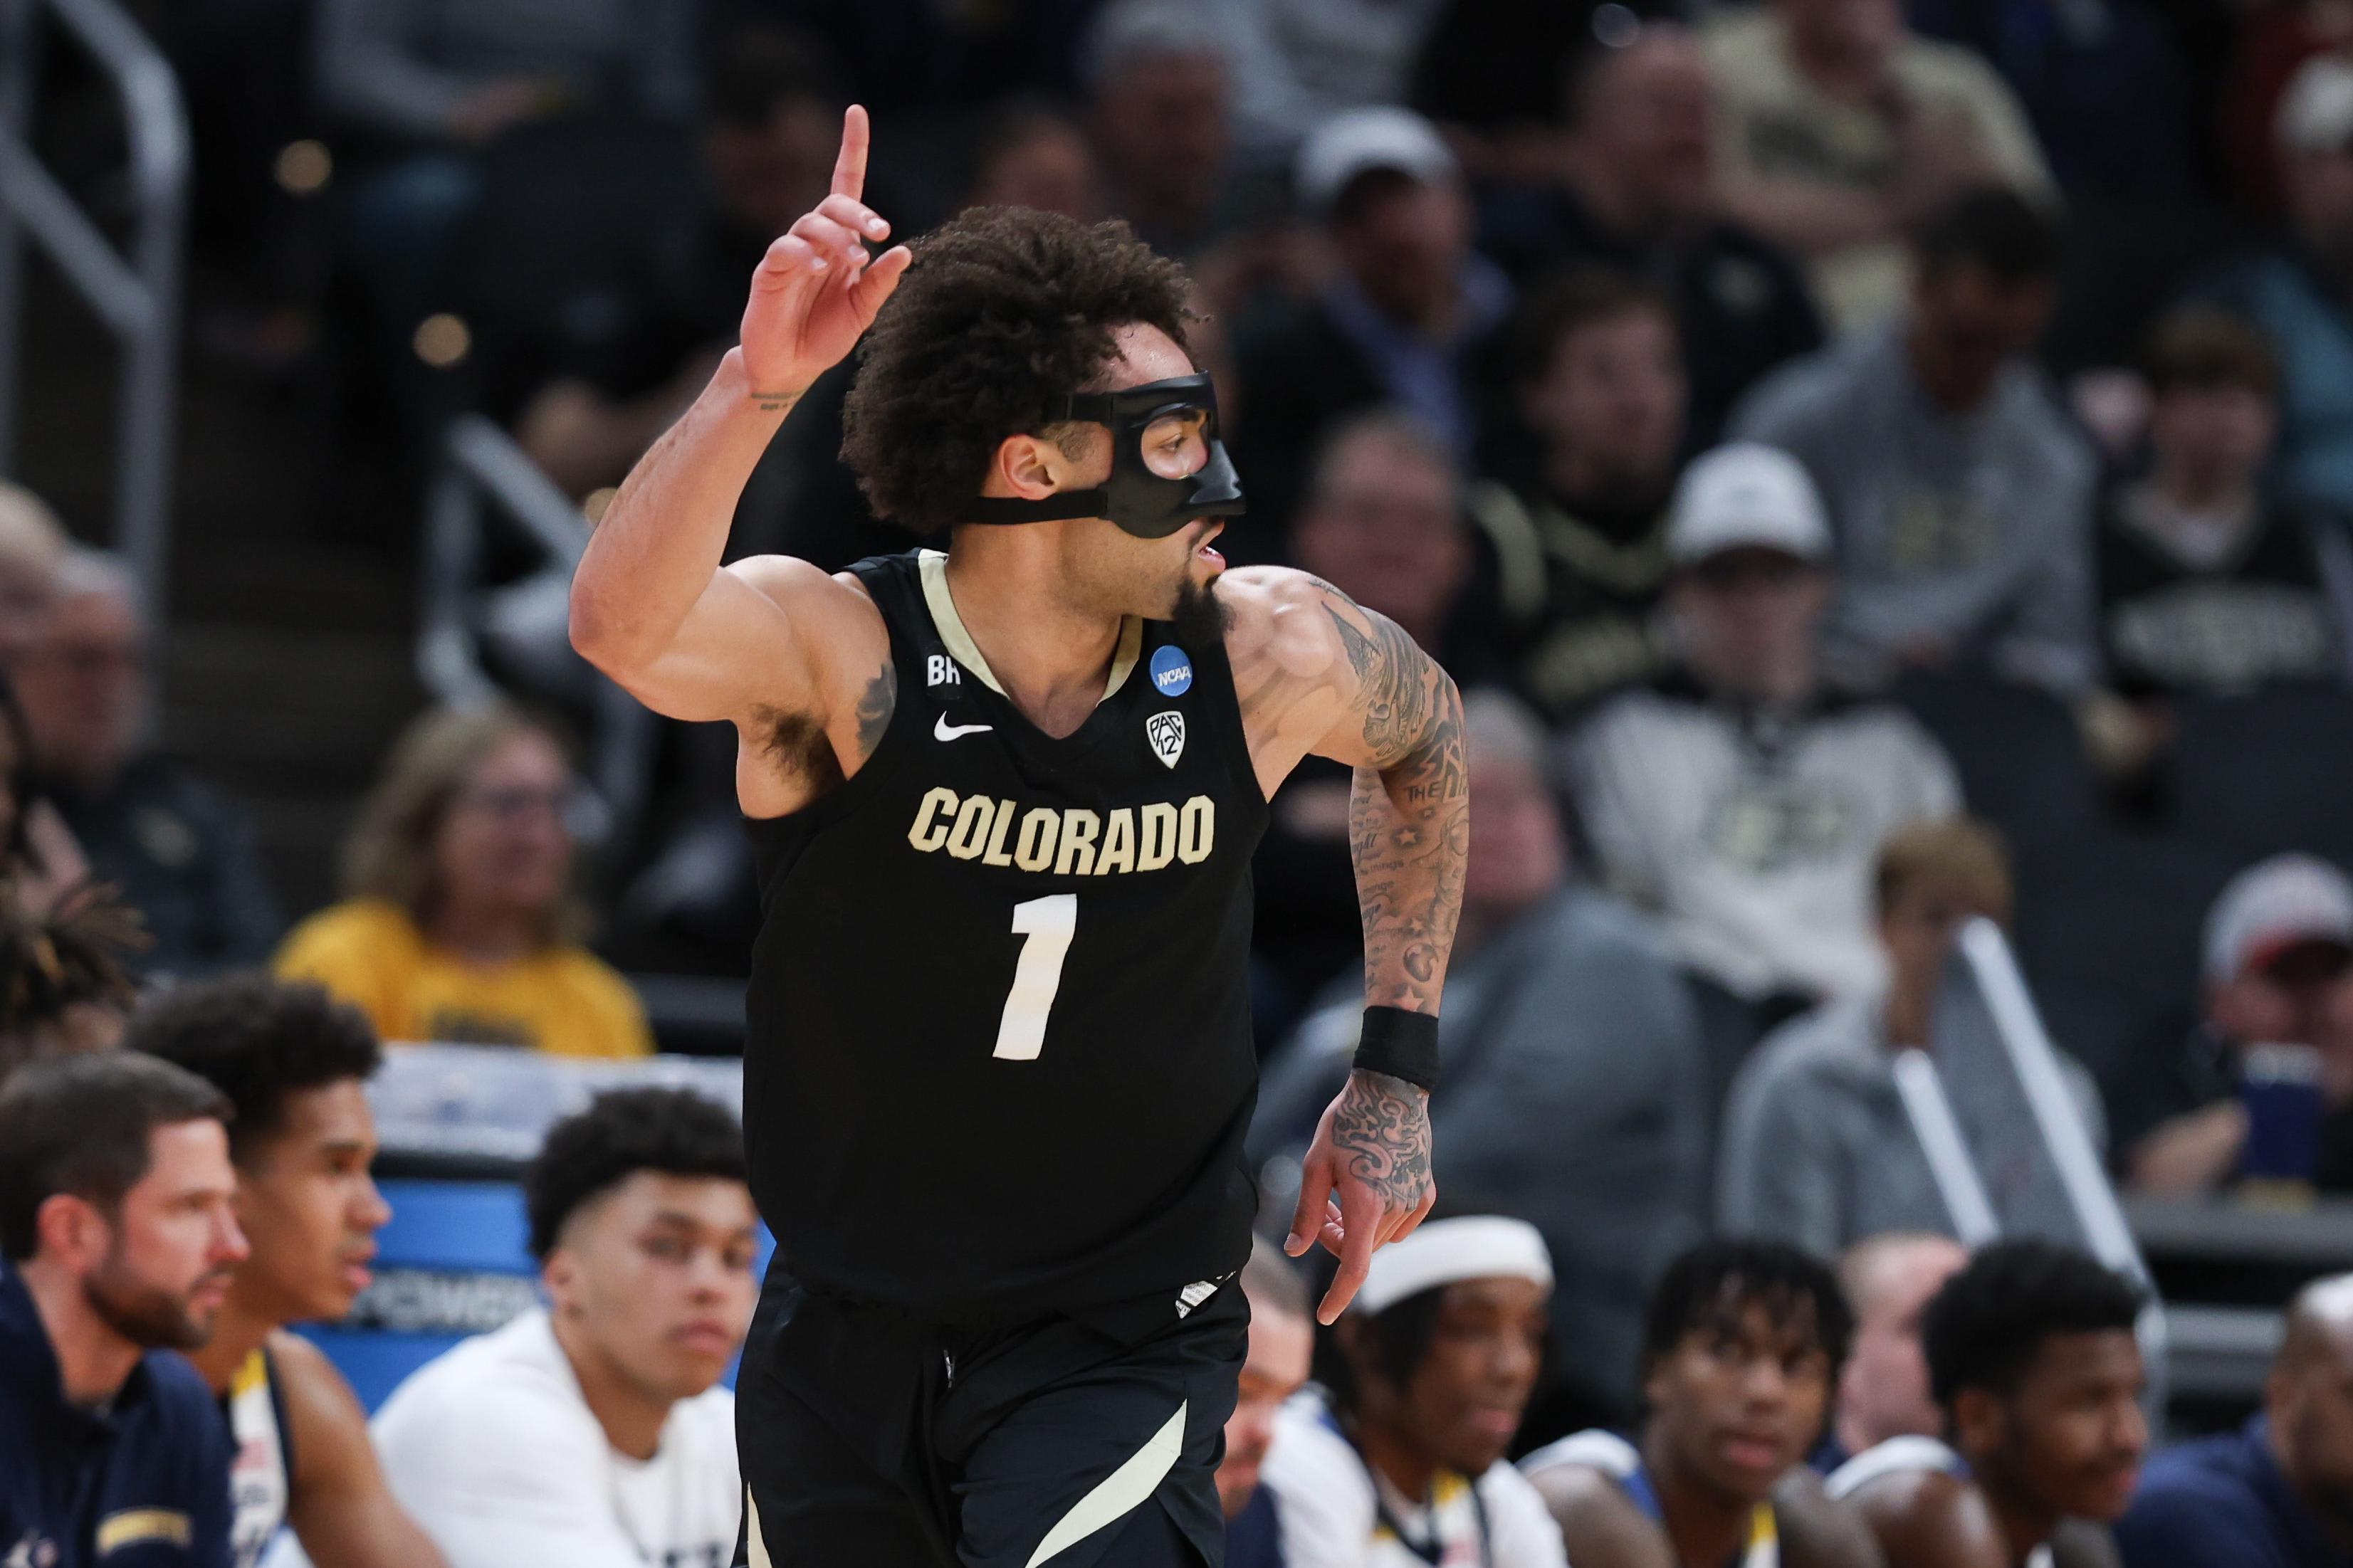 Colorado Buffaloes guard J'Vonne Hadley reacts after scoring against the Marquette Golden Eagles in the NCAA Tournament